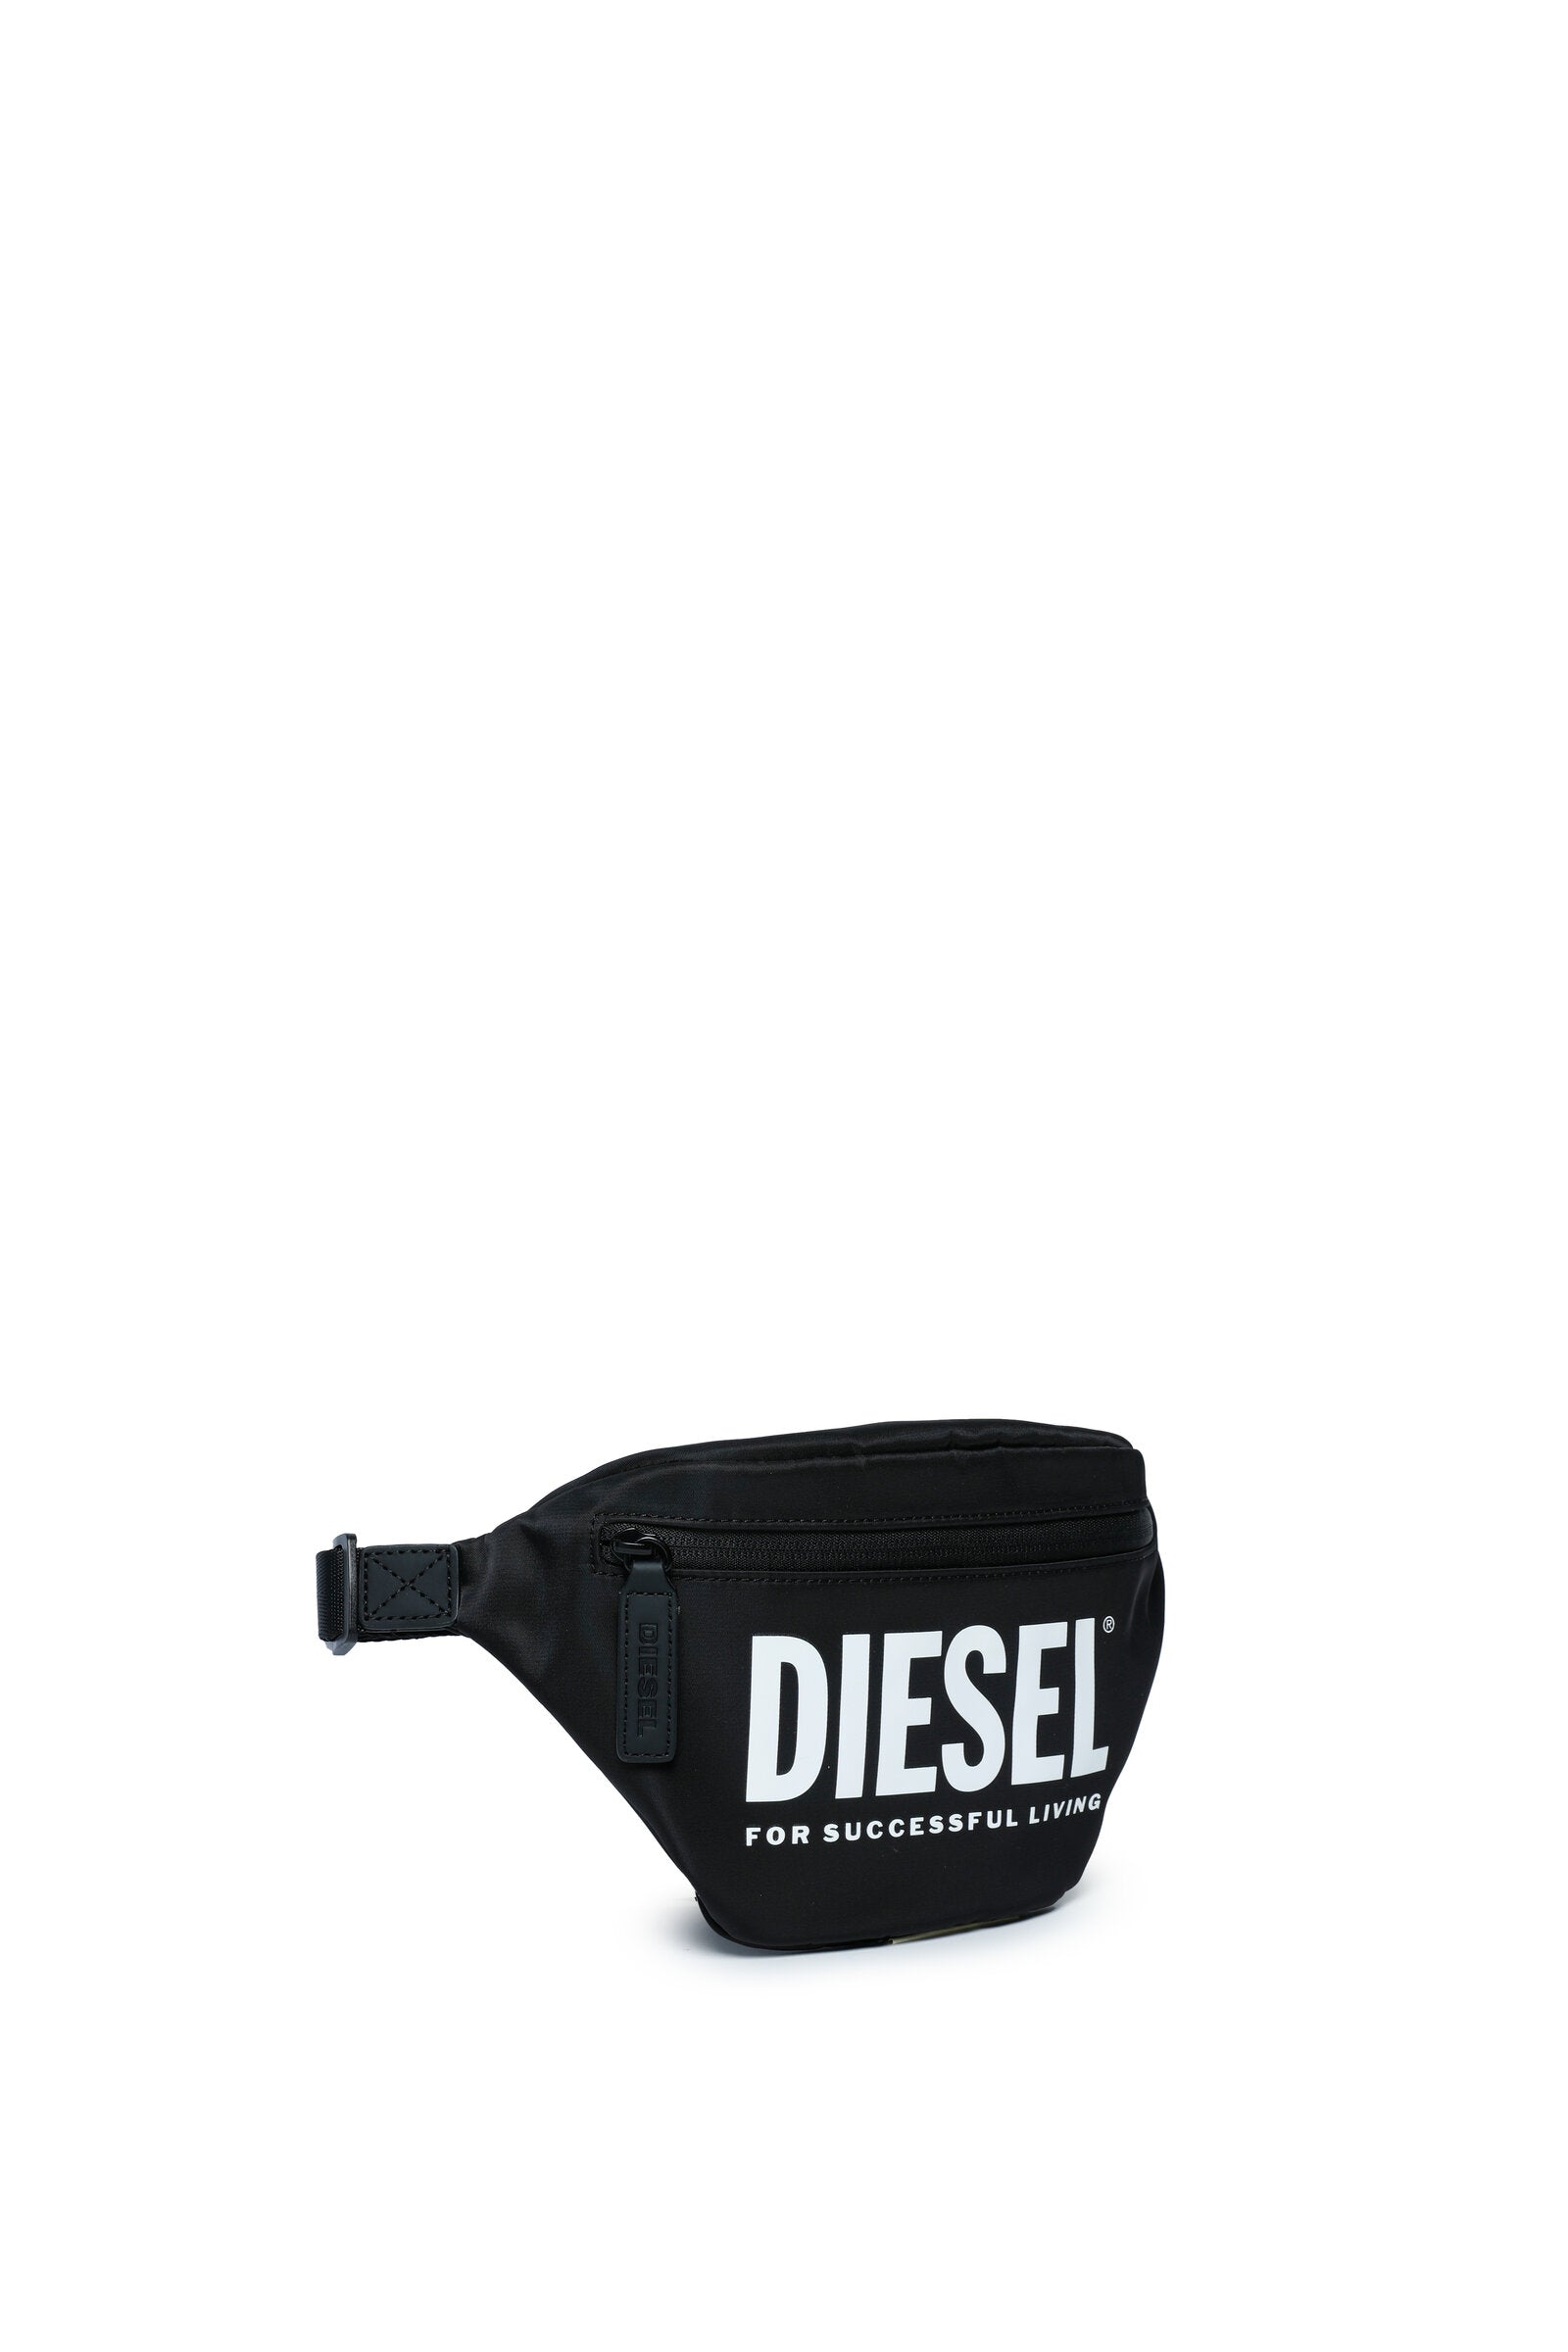 Black fanny pack with logo